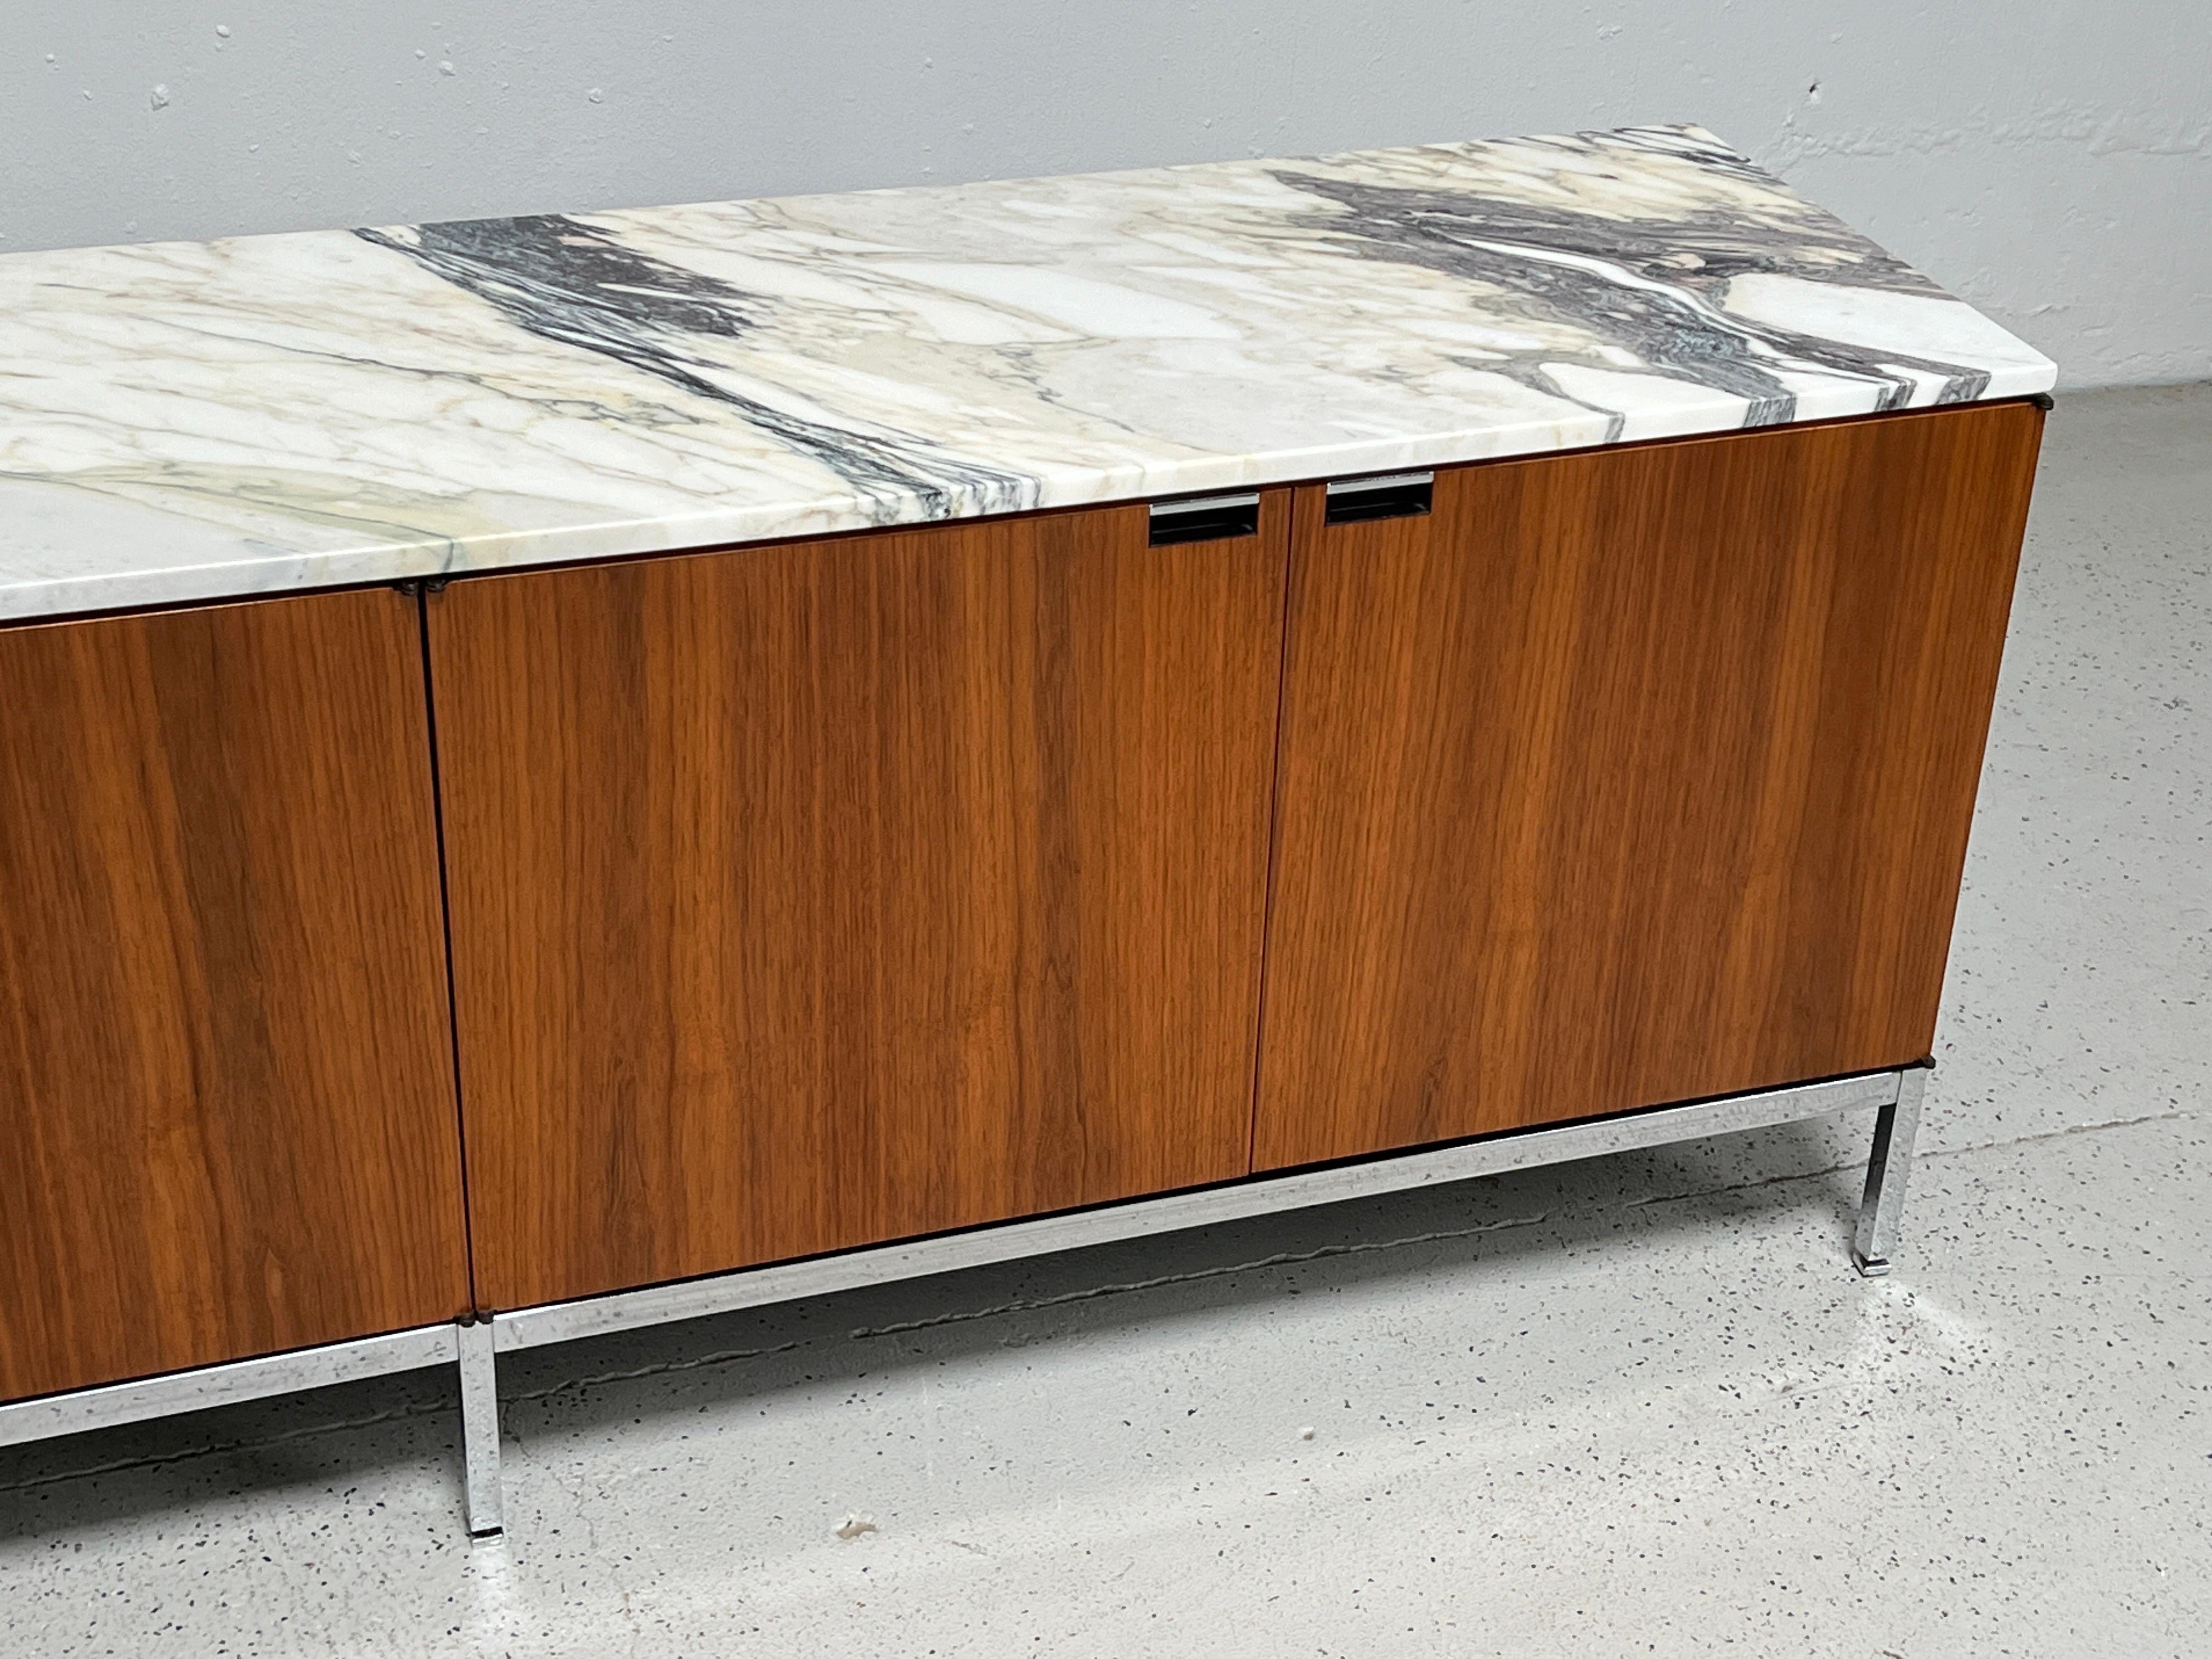 Late 20th Century Walnut and Marble Credenza by Florence Knoll for Knoll